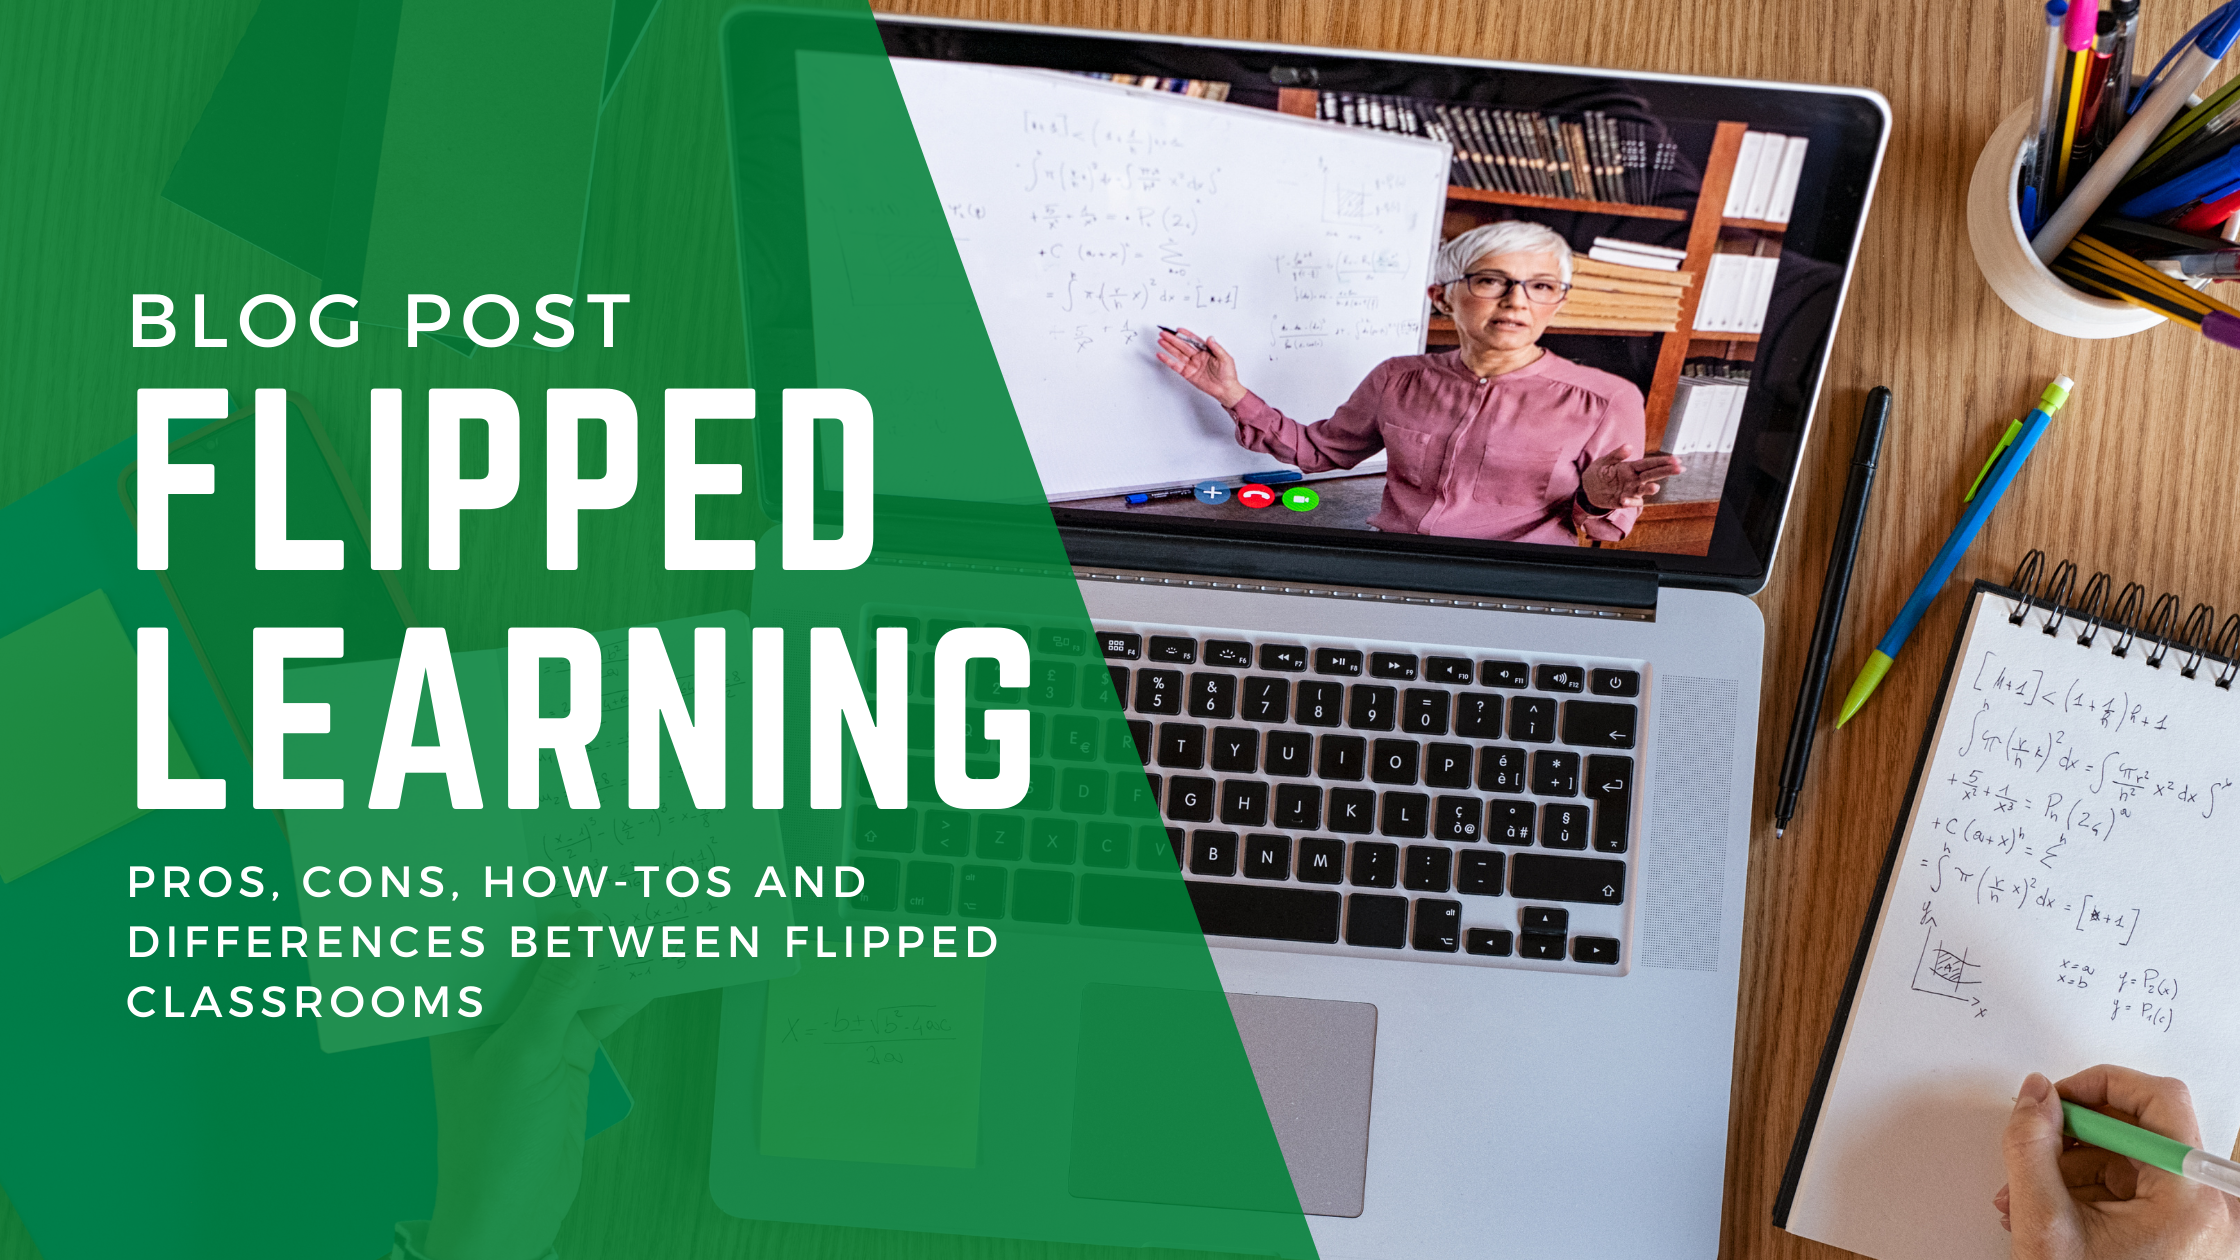 What Is Flipped Learning? Pros, Cons, How-Tos, and Differences Between Flipped Classrooms